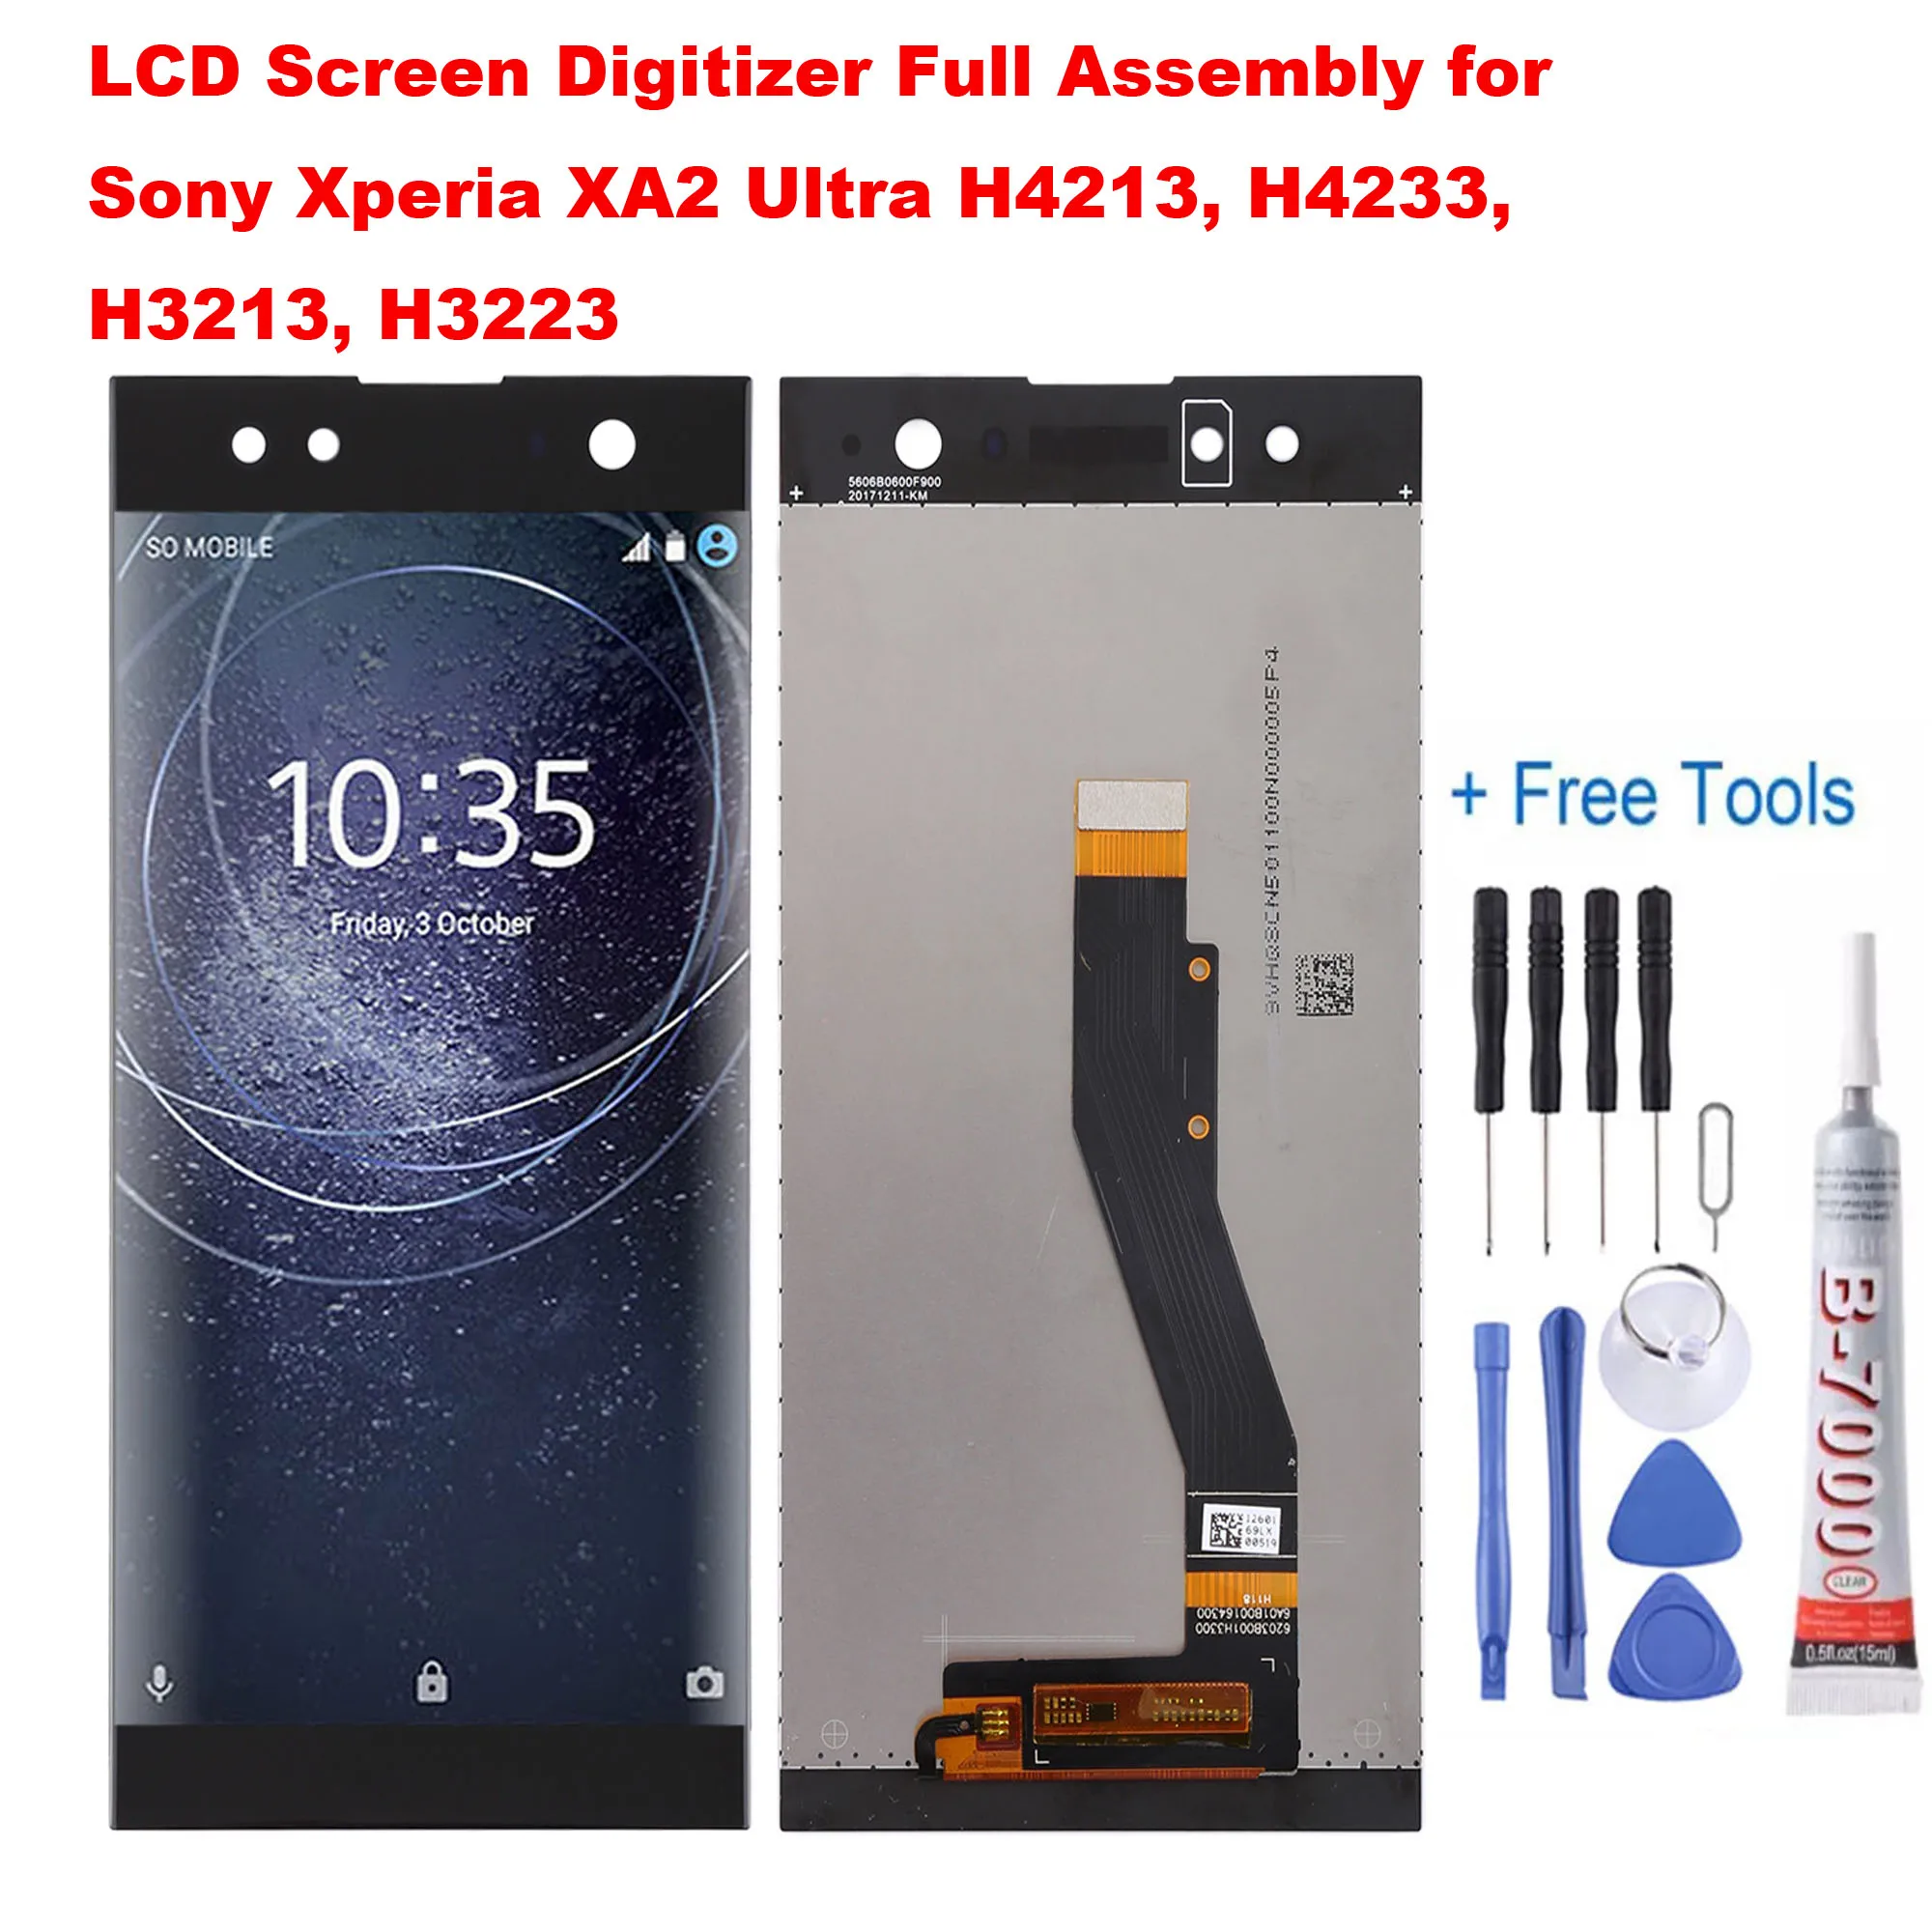 LCD Display Screen Digitizer Full Assembly for Sony Xperia XA2 Ultra H4213, H4233, H3213, H3223 Free Tools